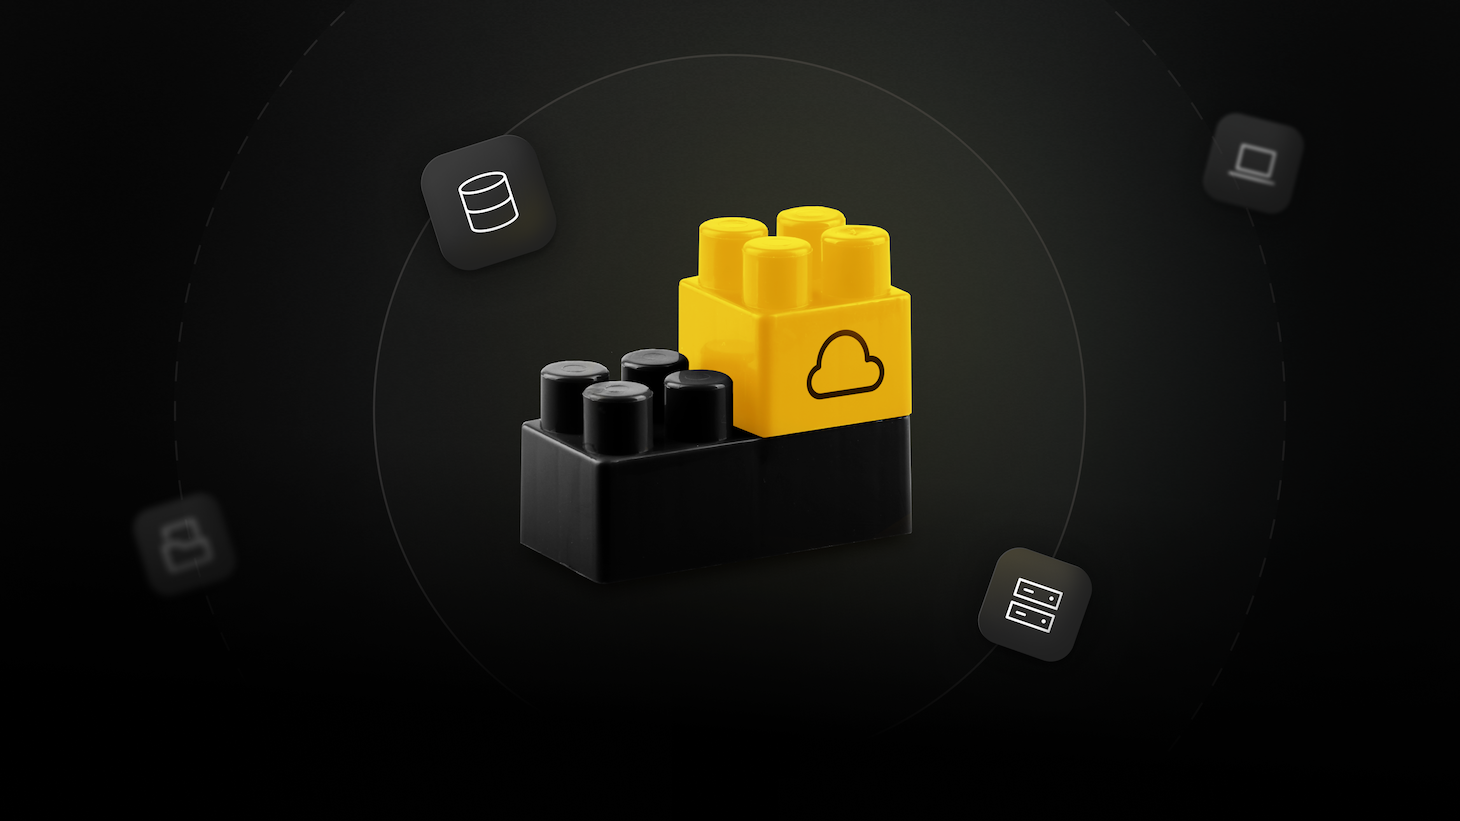 Why Cloud Computing Architecture Components Are Like... LEGO Blocks?